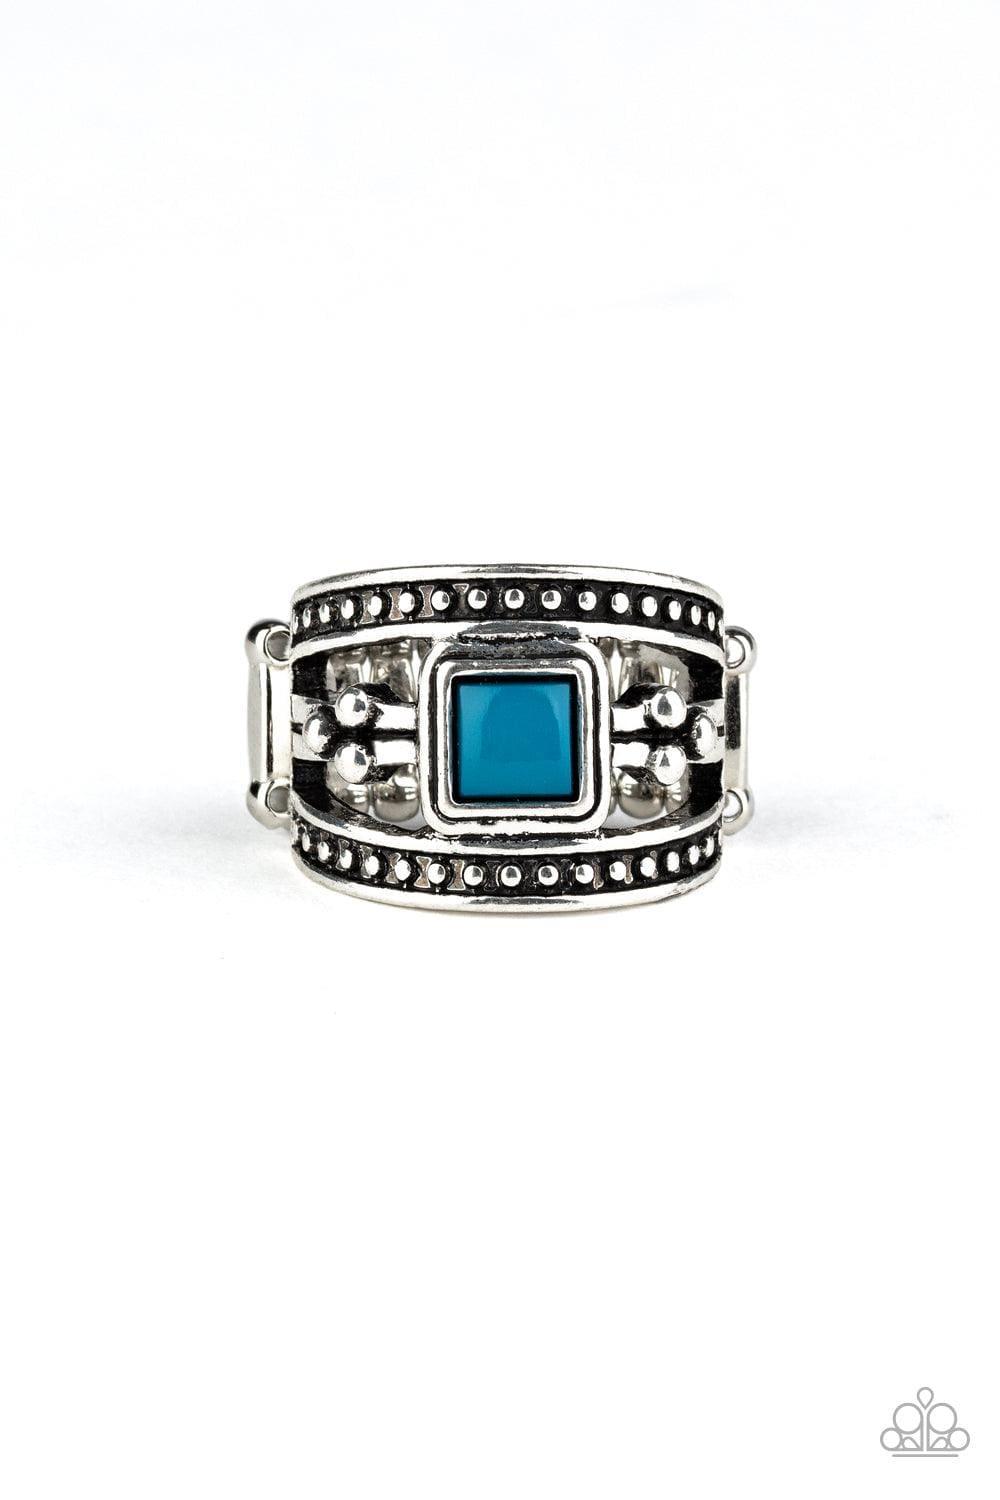 Paparazzi Accessories - Vivid View - Blue Ring - Bling by JessieK